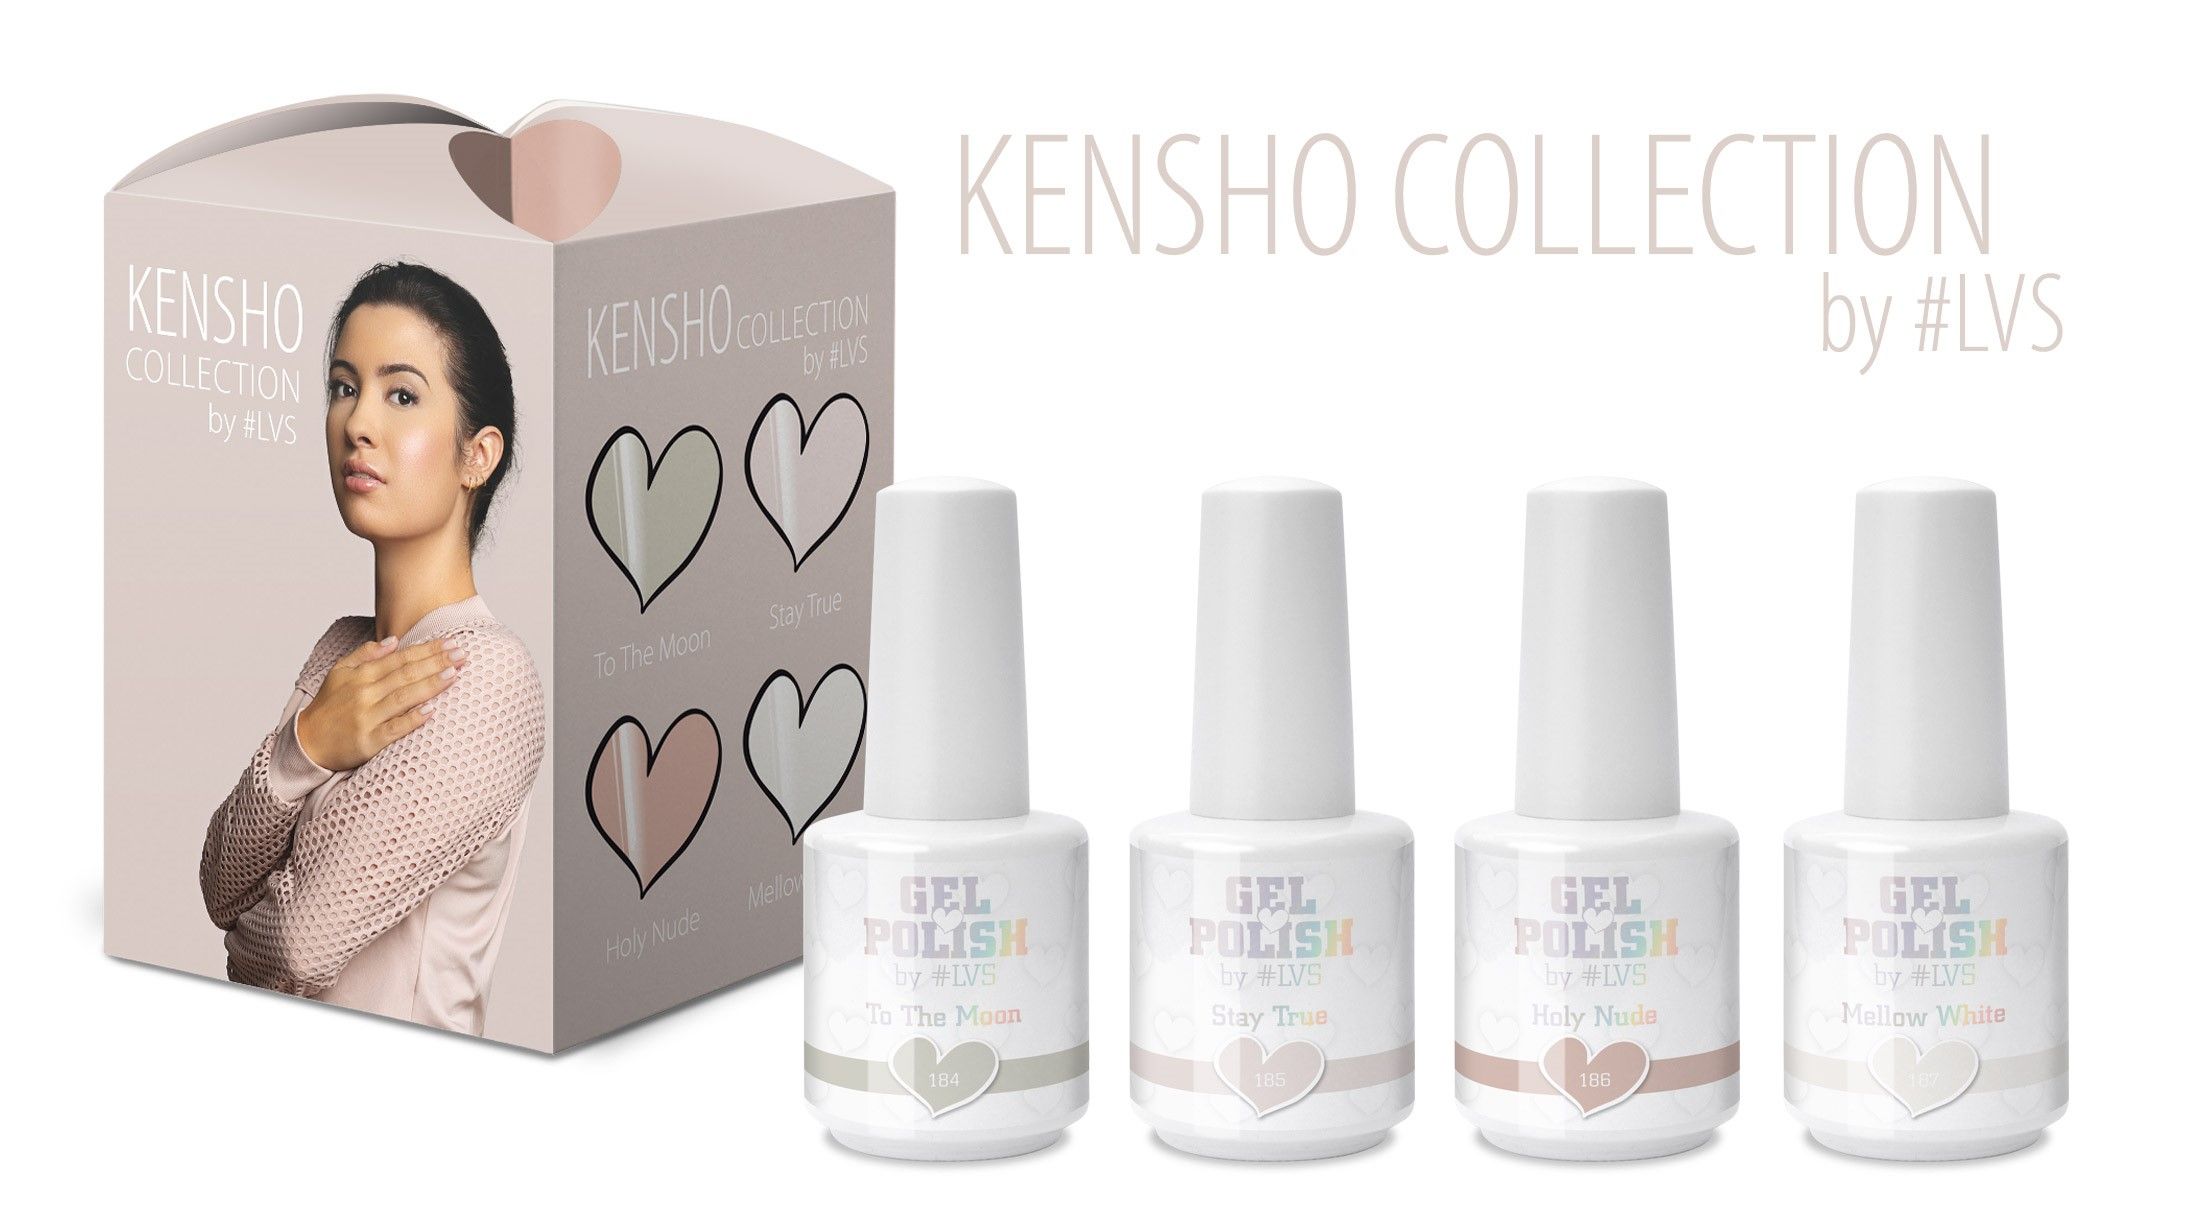 Kensho Collection by #LVS